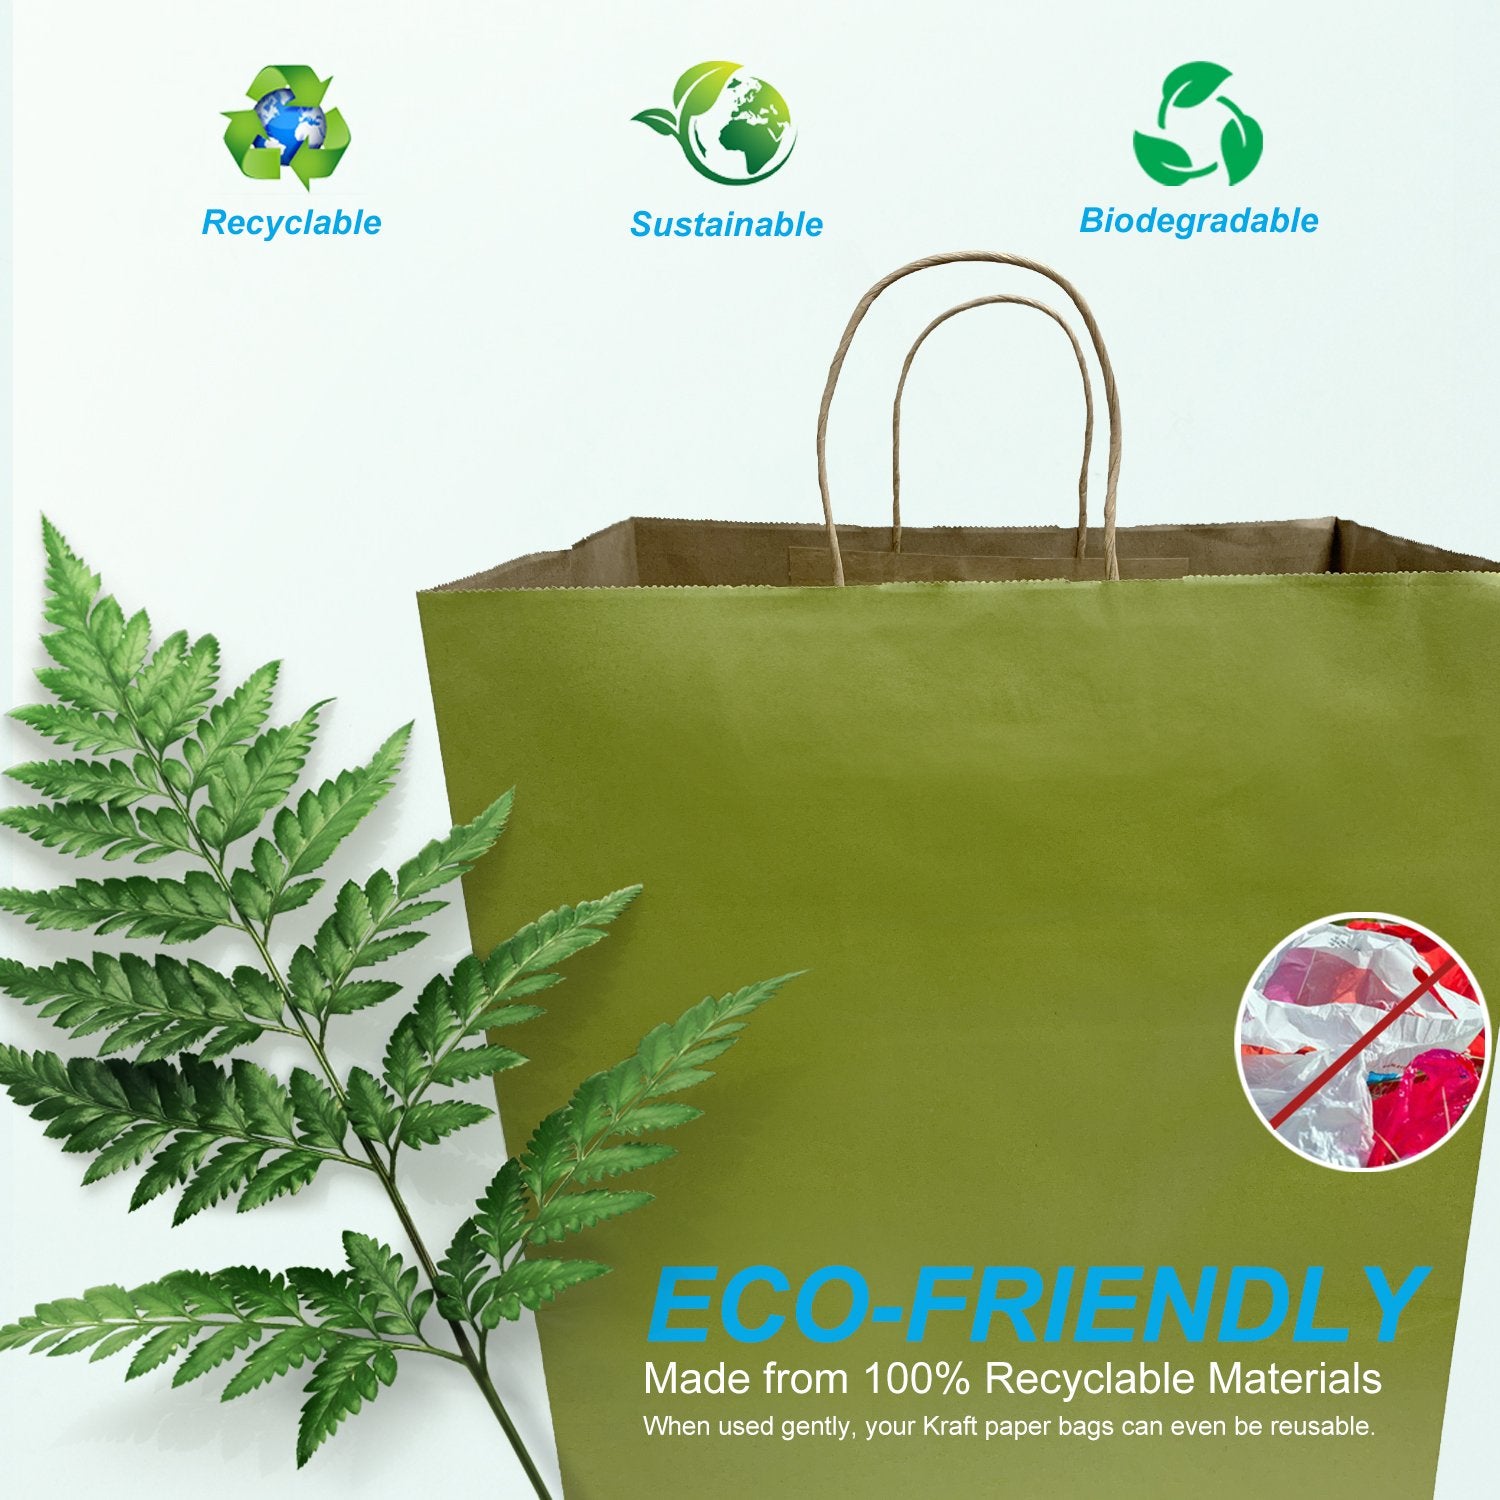 200 Pcs, Super Royal, 14x10x15.75 inches, Lime Kraft Paper Bags, with Twisted Handle